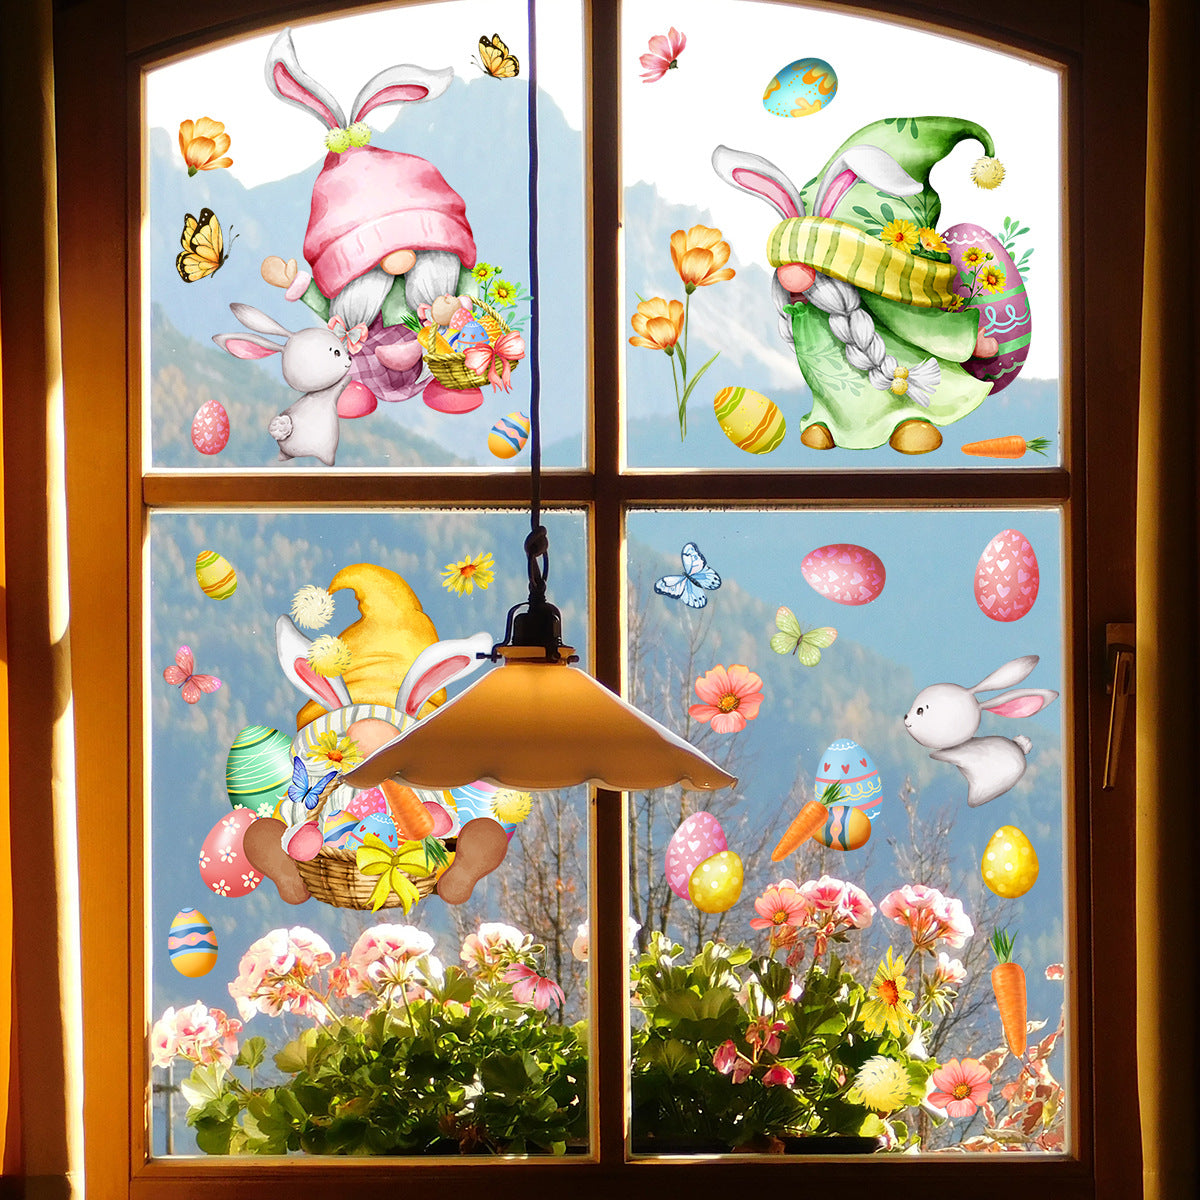 Easter Cartoon Double-sided Visual Static Sticker Glazing Plate Glass Home Decoration, Easter decorations, Easter eggs decorations, Easter bunny decorations, Easter wreaths, Easter garlands, Easter centerpieces, Easter table runners, Easter tablecloths, Easter baskets decorations, Easter grass decorations, Easter candy decorations, Easter lights, Easter inflatables, Easter door wreaths, Easter tree decorations, Easter wall art, Easter stickers